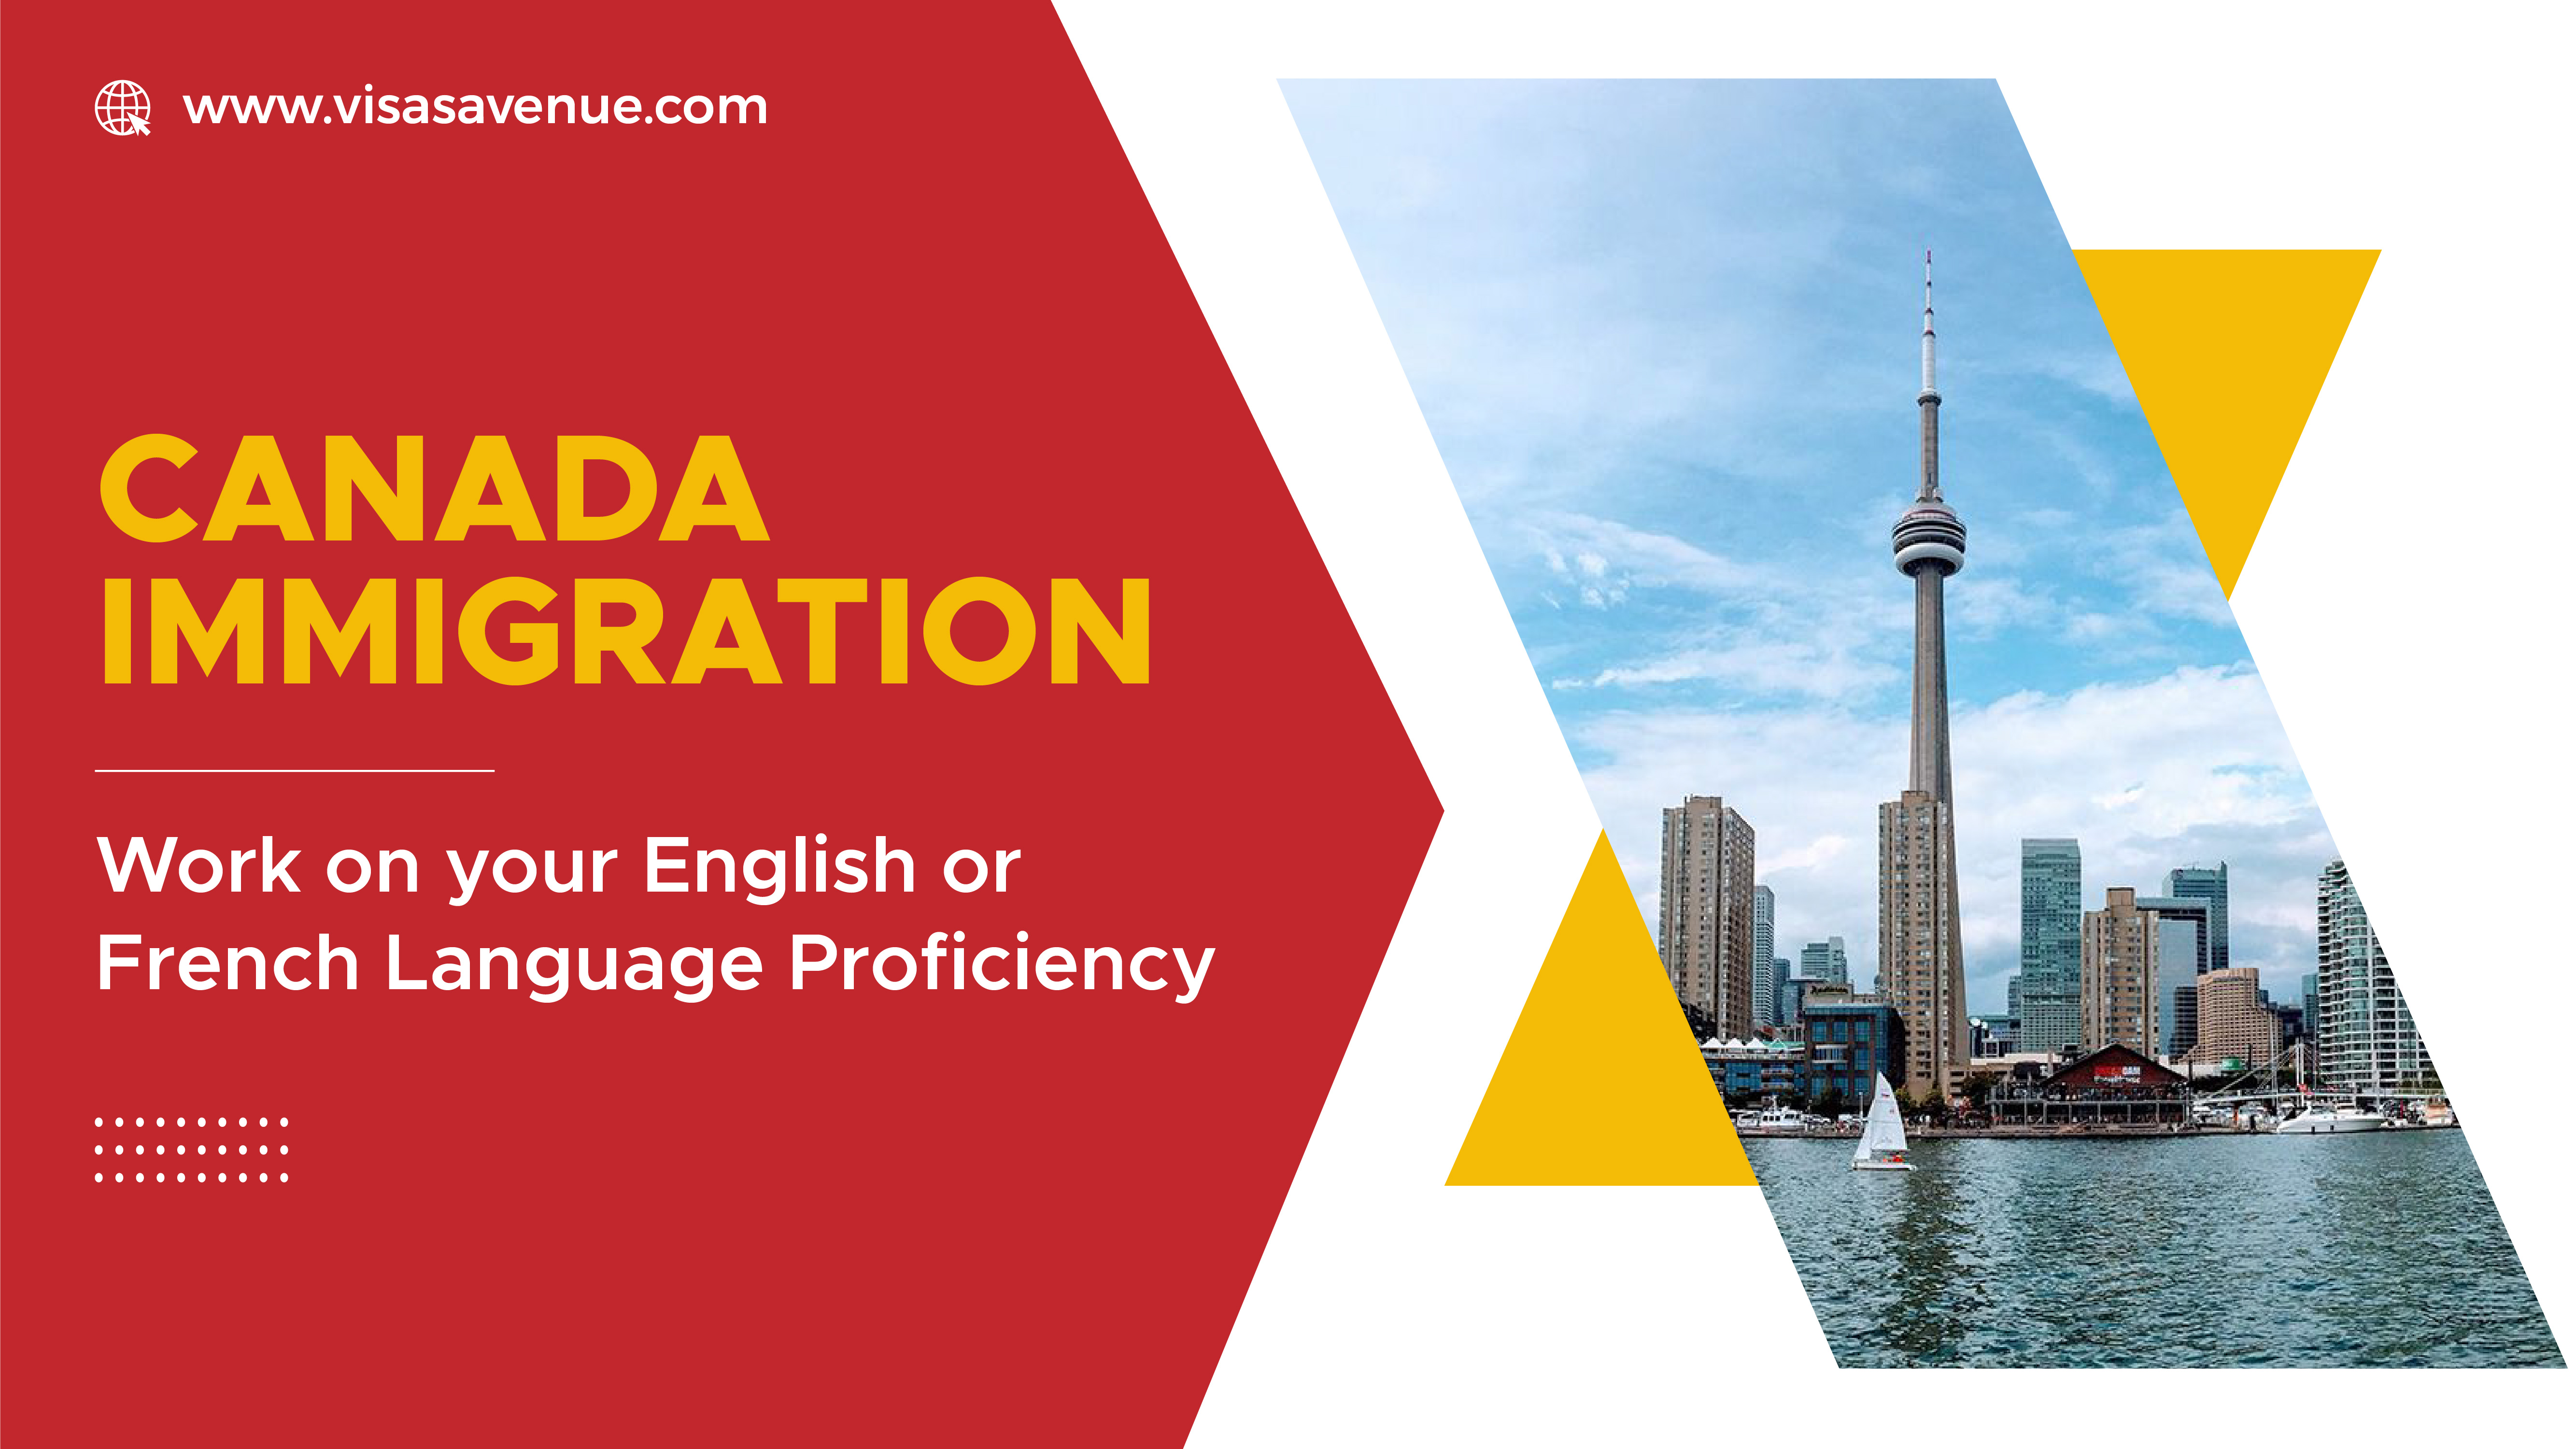 Canada Immigration- Work on your English or French Language Proficiency